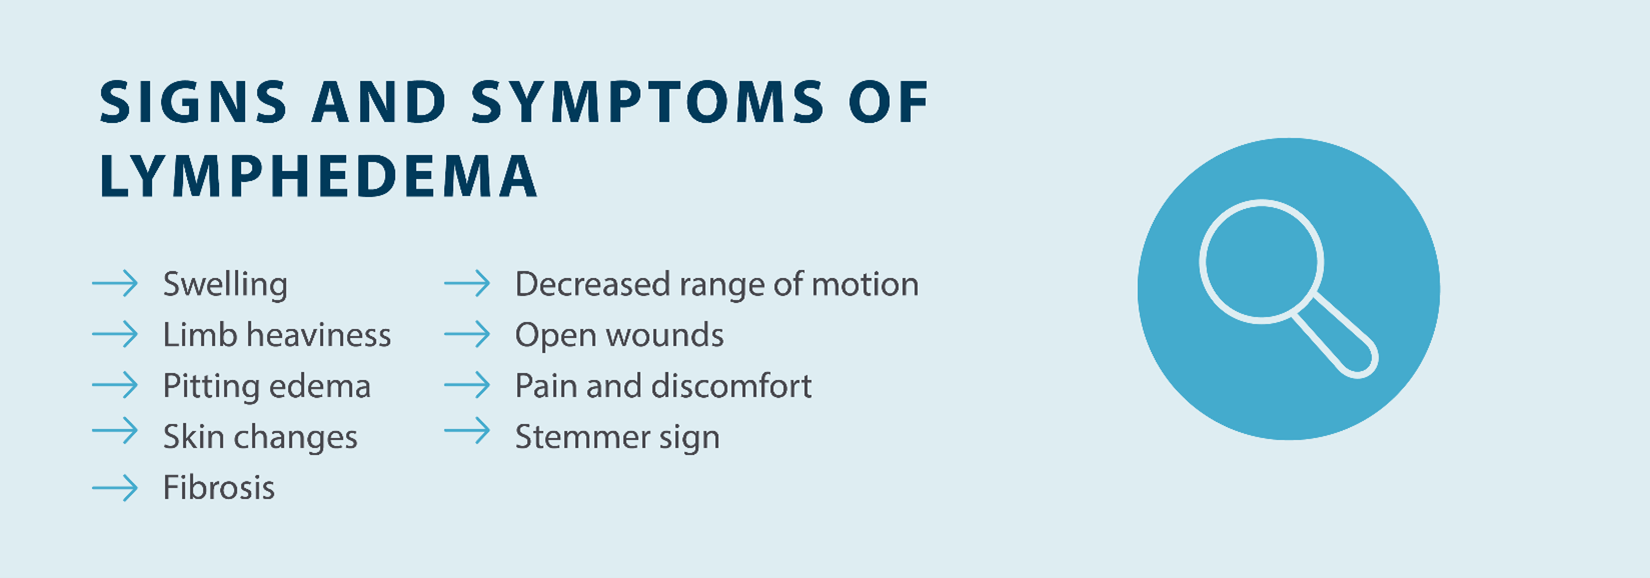 signs and symptoms of lymphedema: swelling, limb heaviness, pitting edema, skin changes, fibrosis, decreased range of motion, open wounds, pain and discomfort, stemmer sign